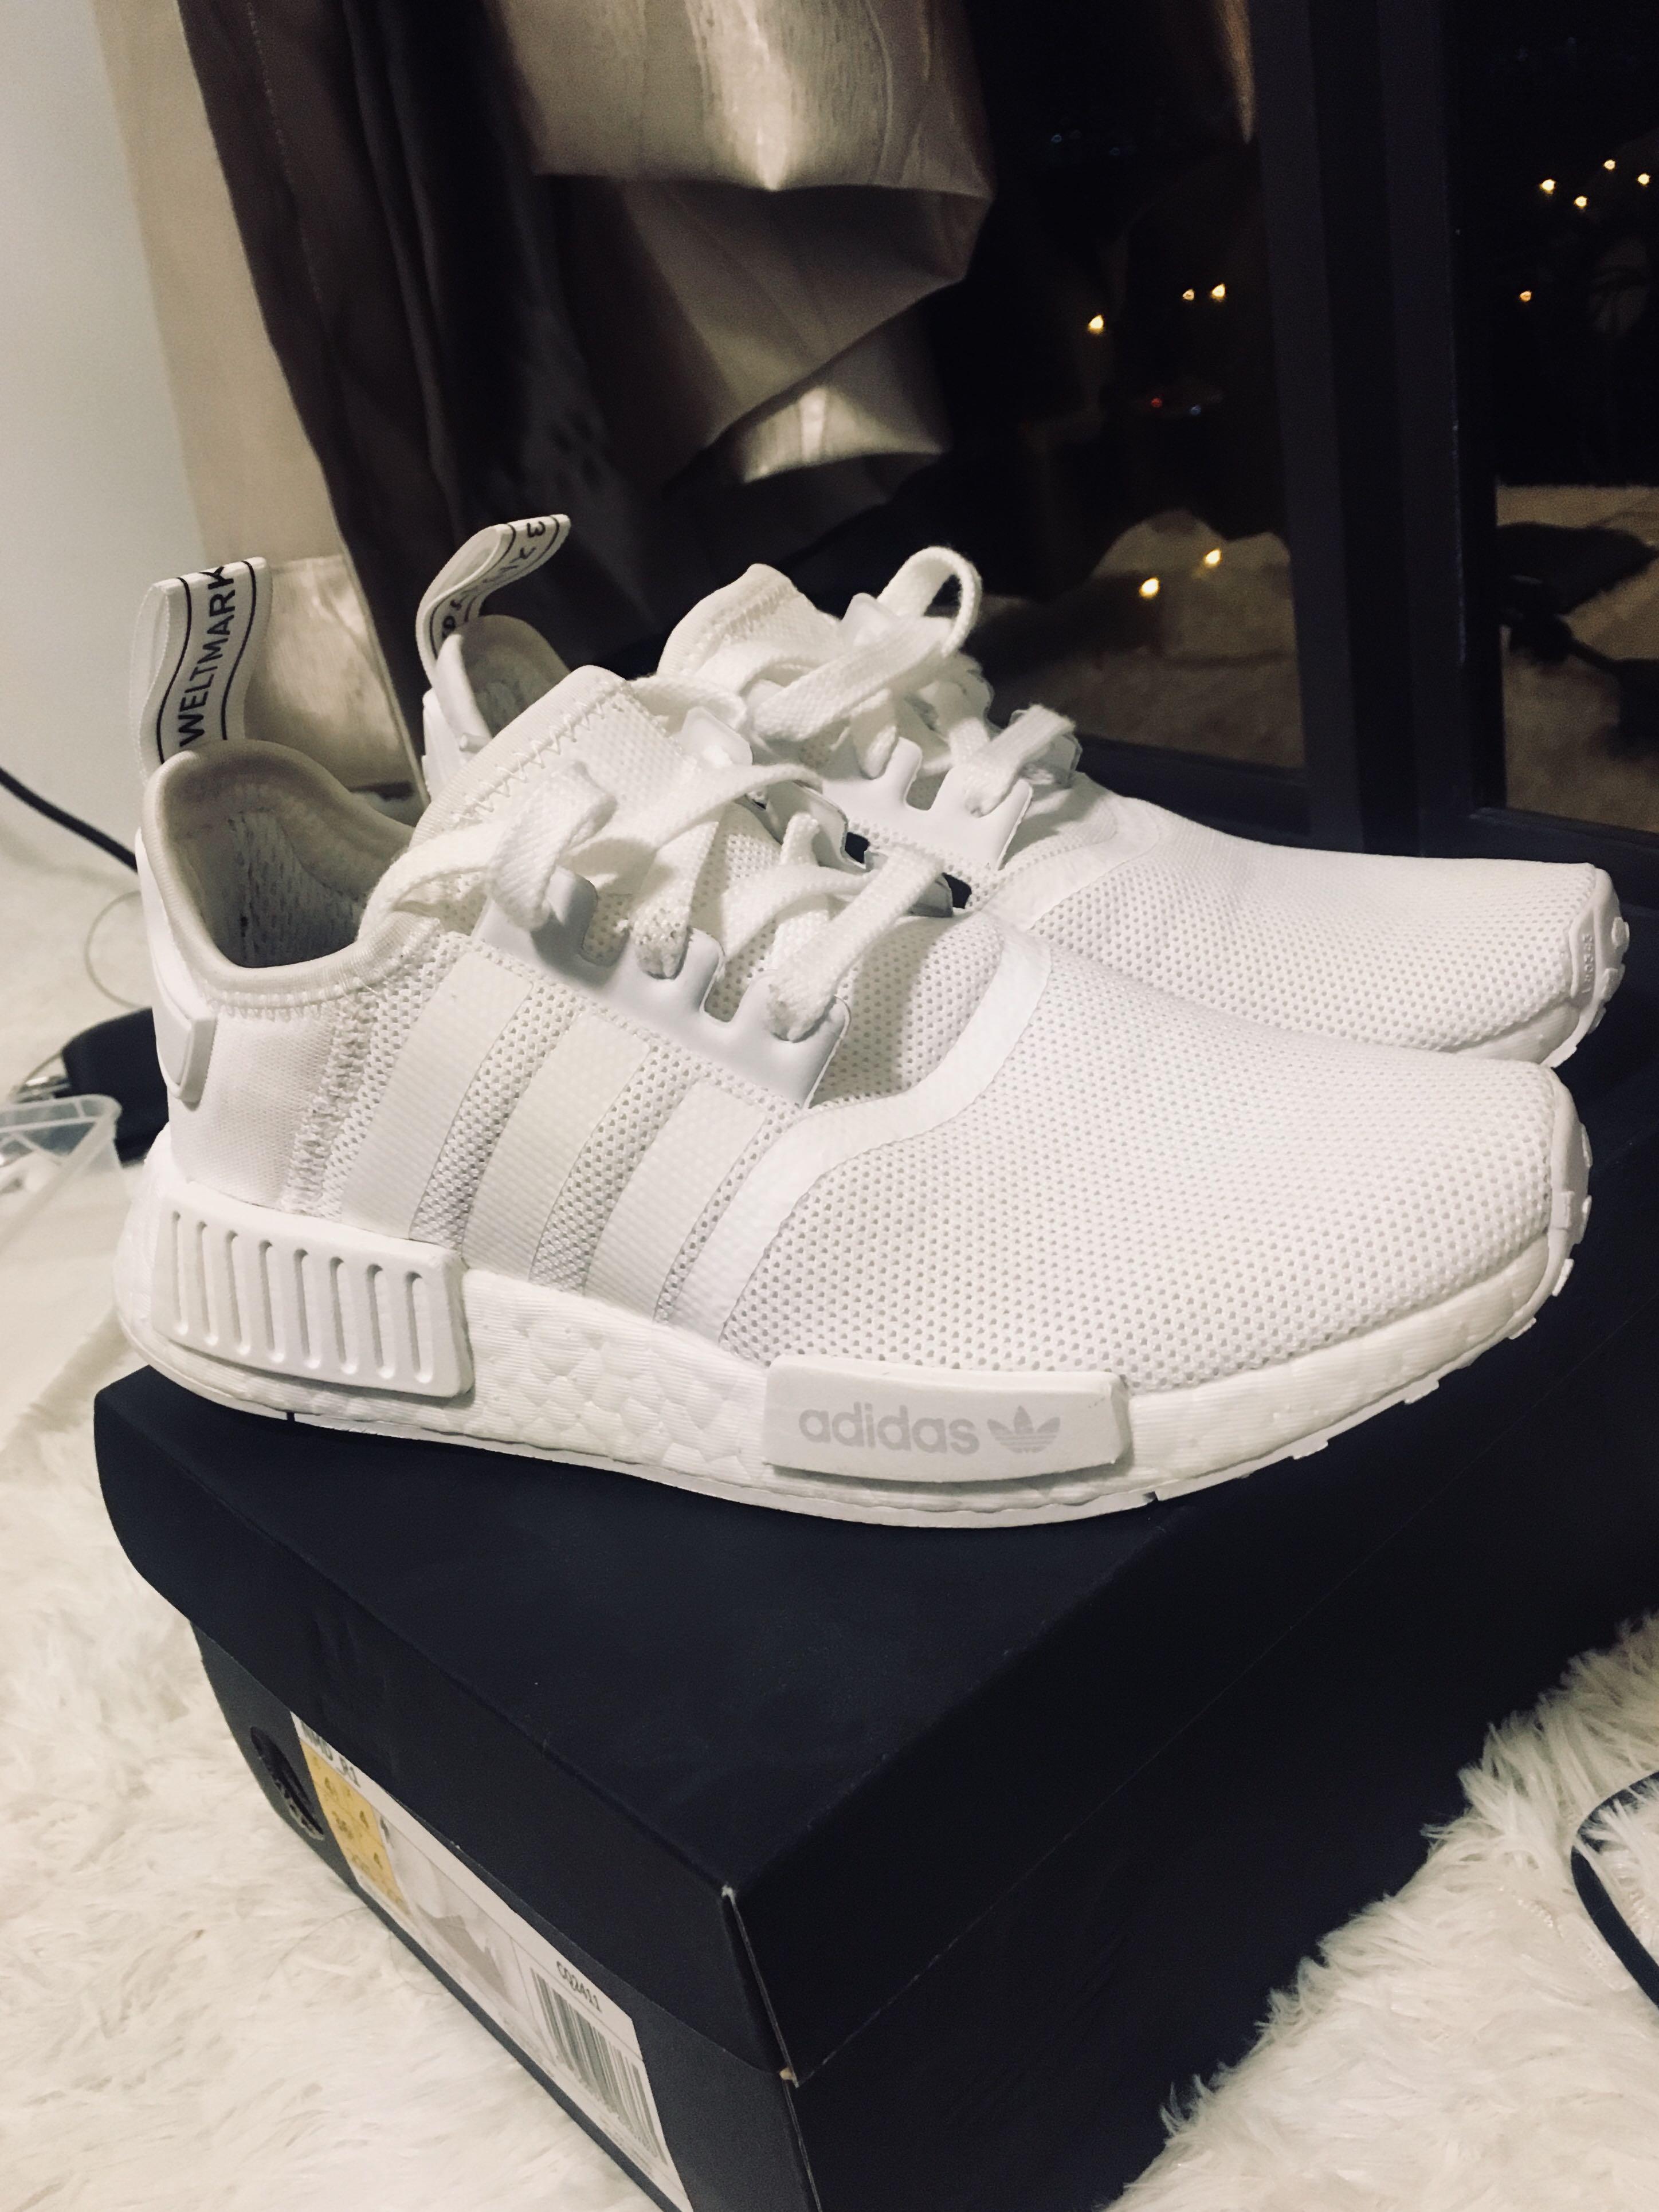 Authentic Adidas NMD R1 (white) SIZE US 